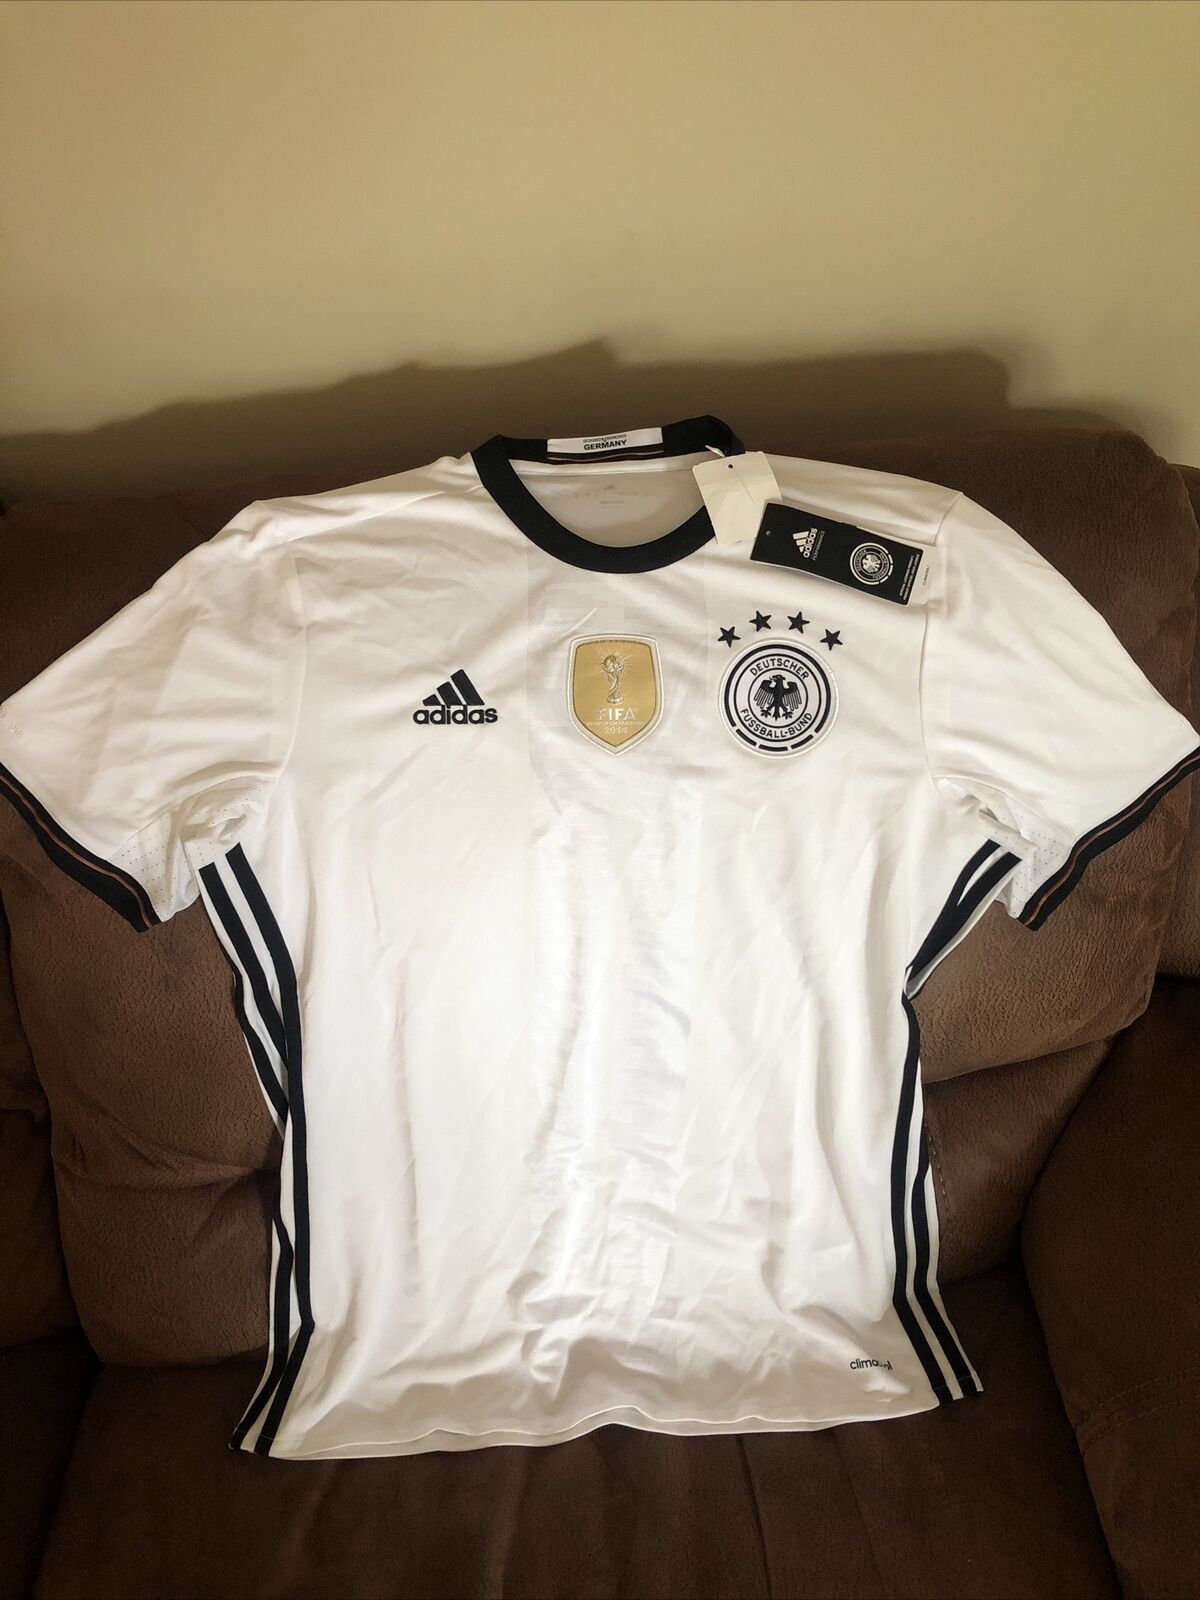 Adidas germany 2014 World Cup Champions soccer jersey new with tag size L  Men's